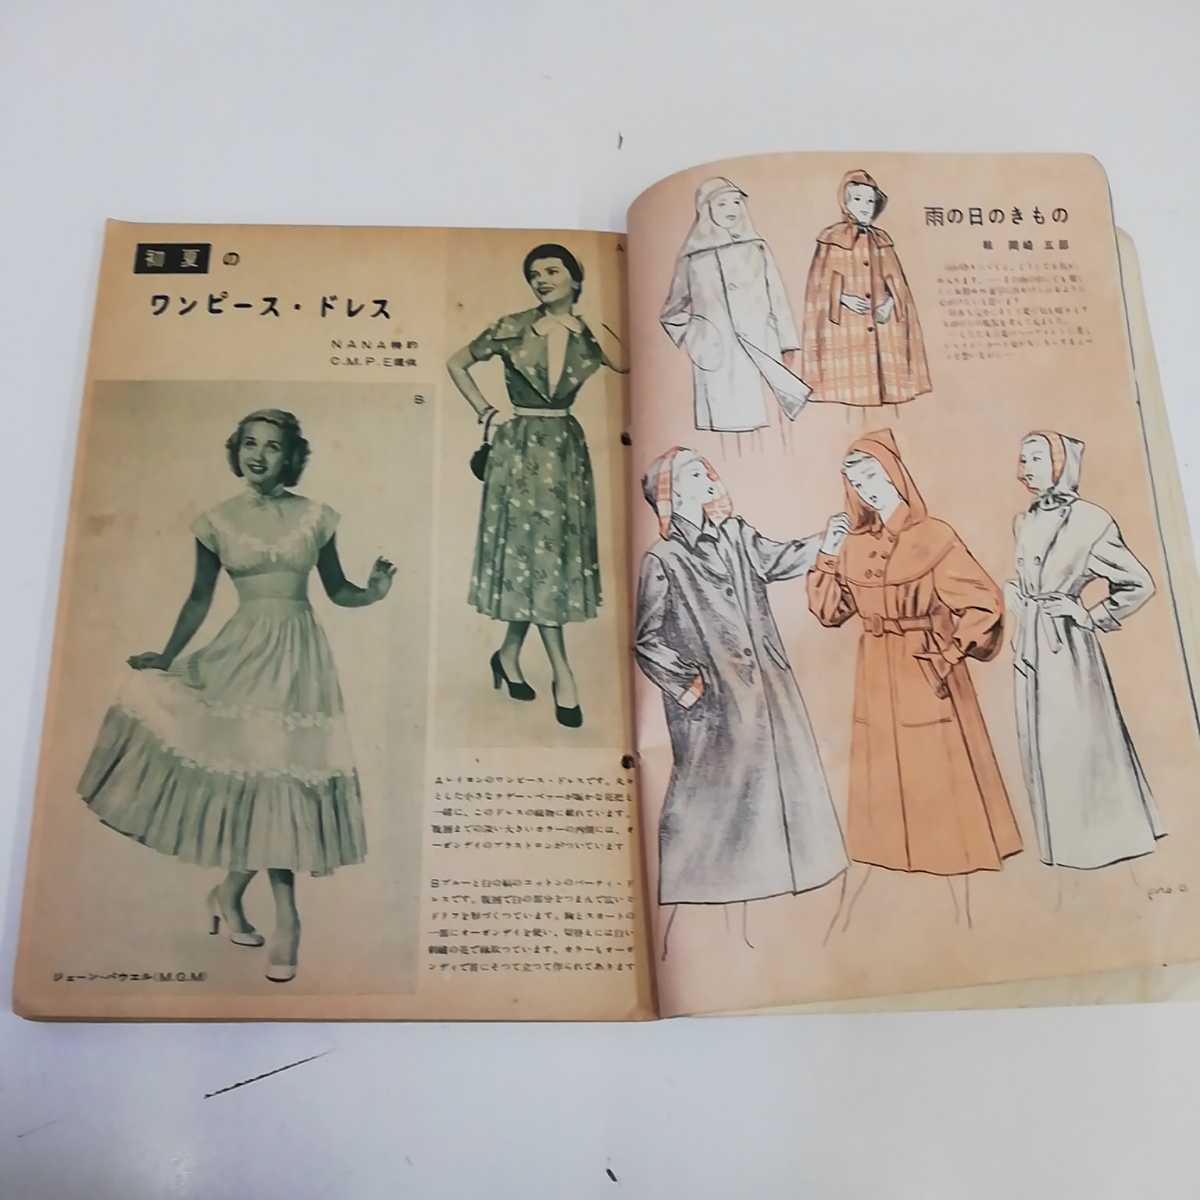 1_V clothes equipment research equipment .1950 year Showa era 25 year 6 month 1 day issue . cover scratch equipped culture clothes equipment .. Showa Retro retro magazine retro dressmaking fashion attire 